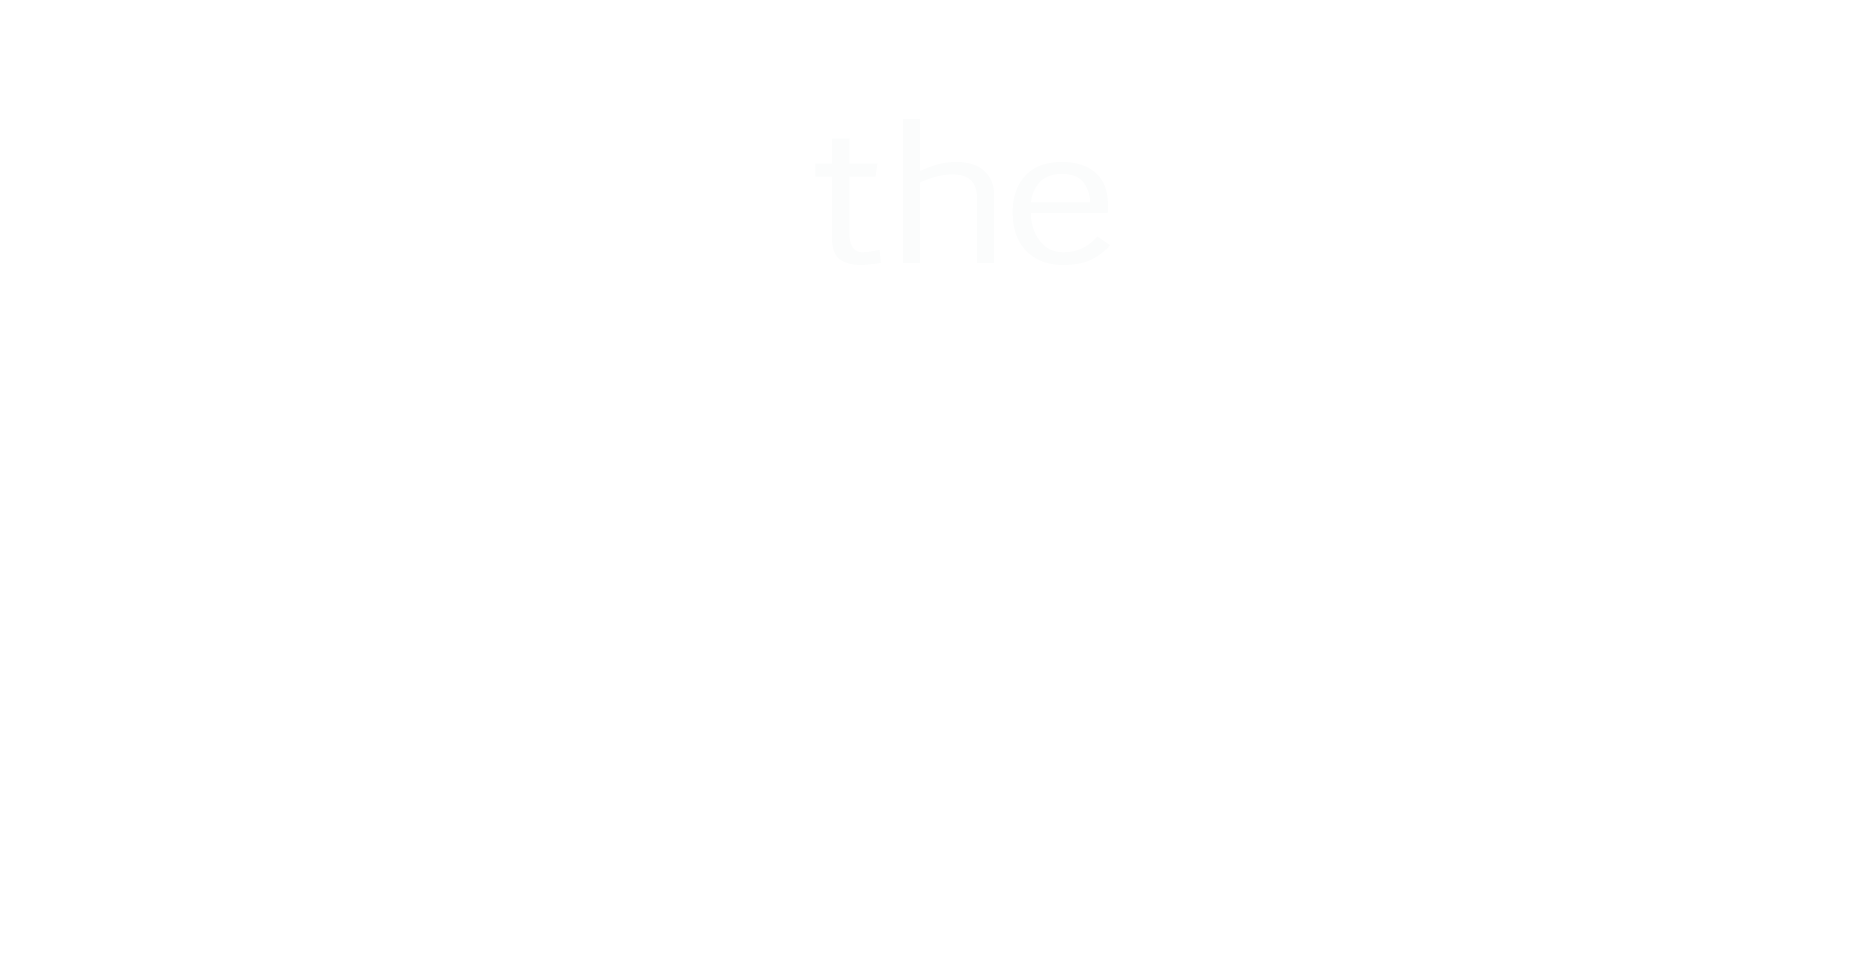 The Co-Op District